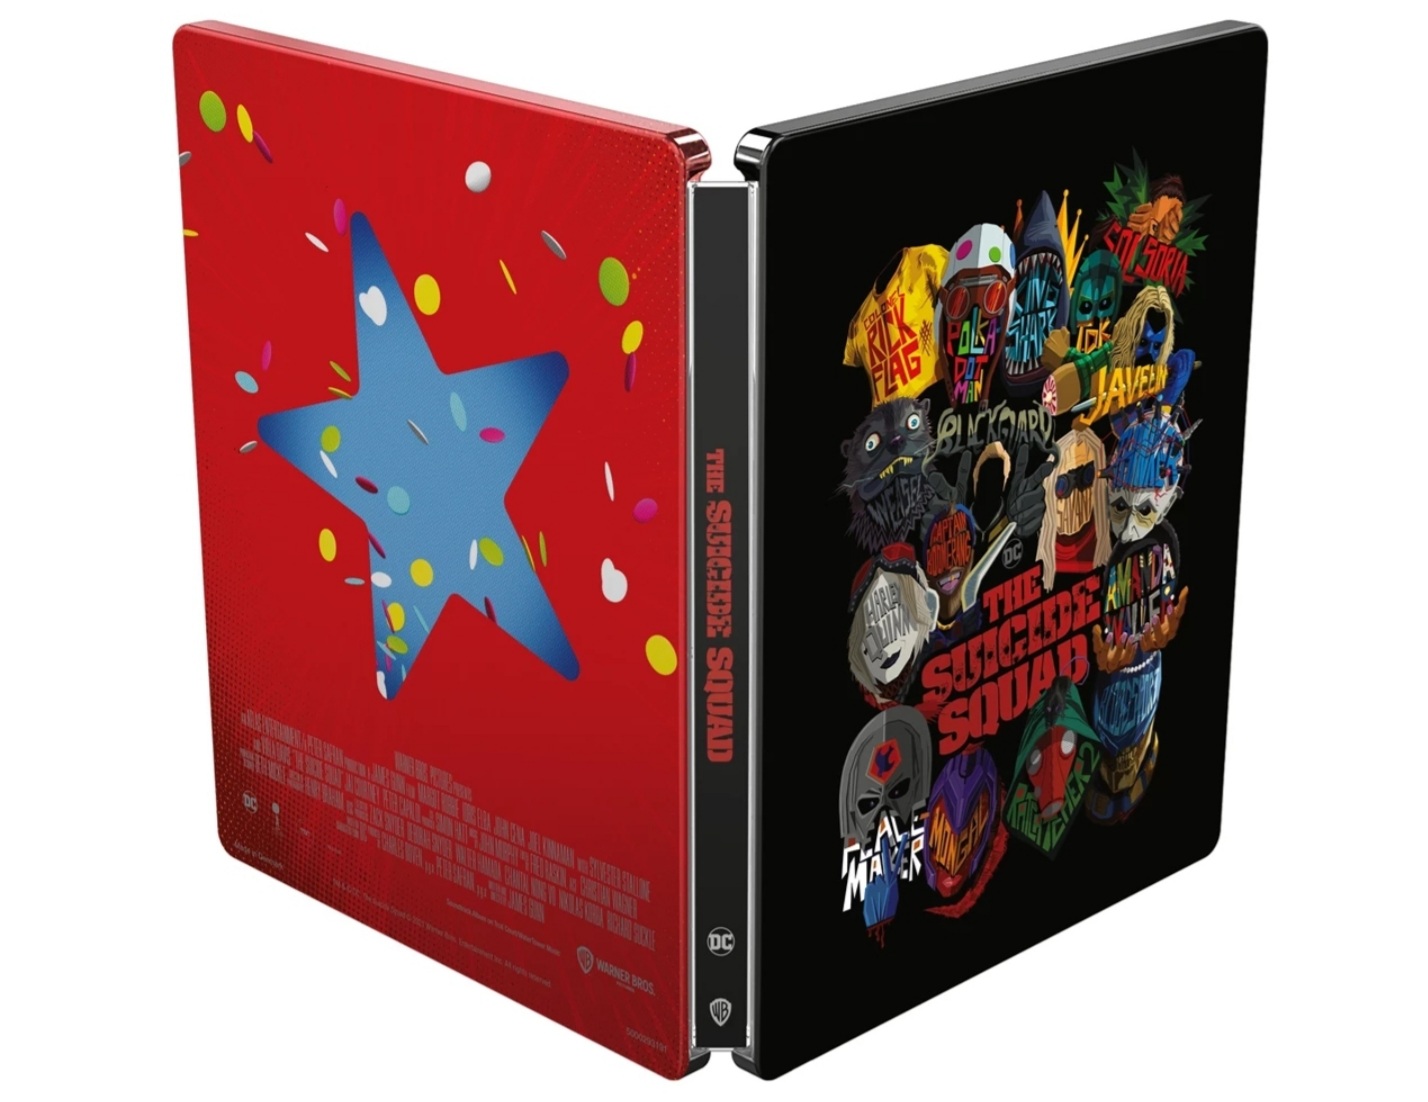 The Suicide Squad Limited Edition Steelbook (4K Ultra HD) – Warner